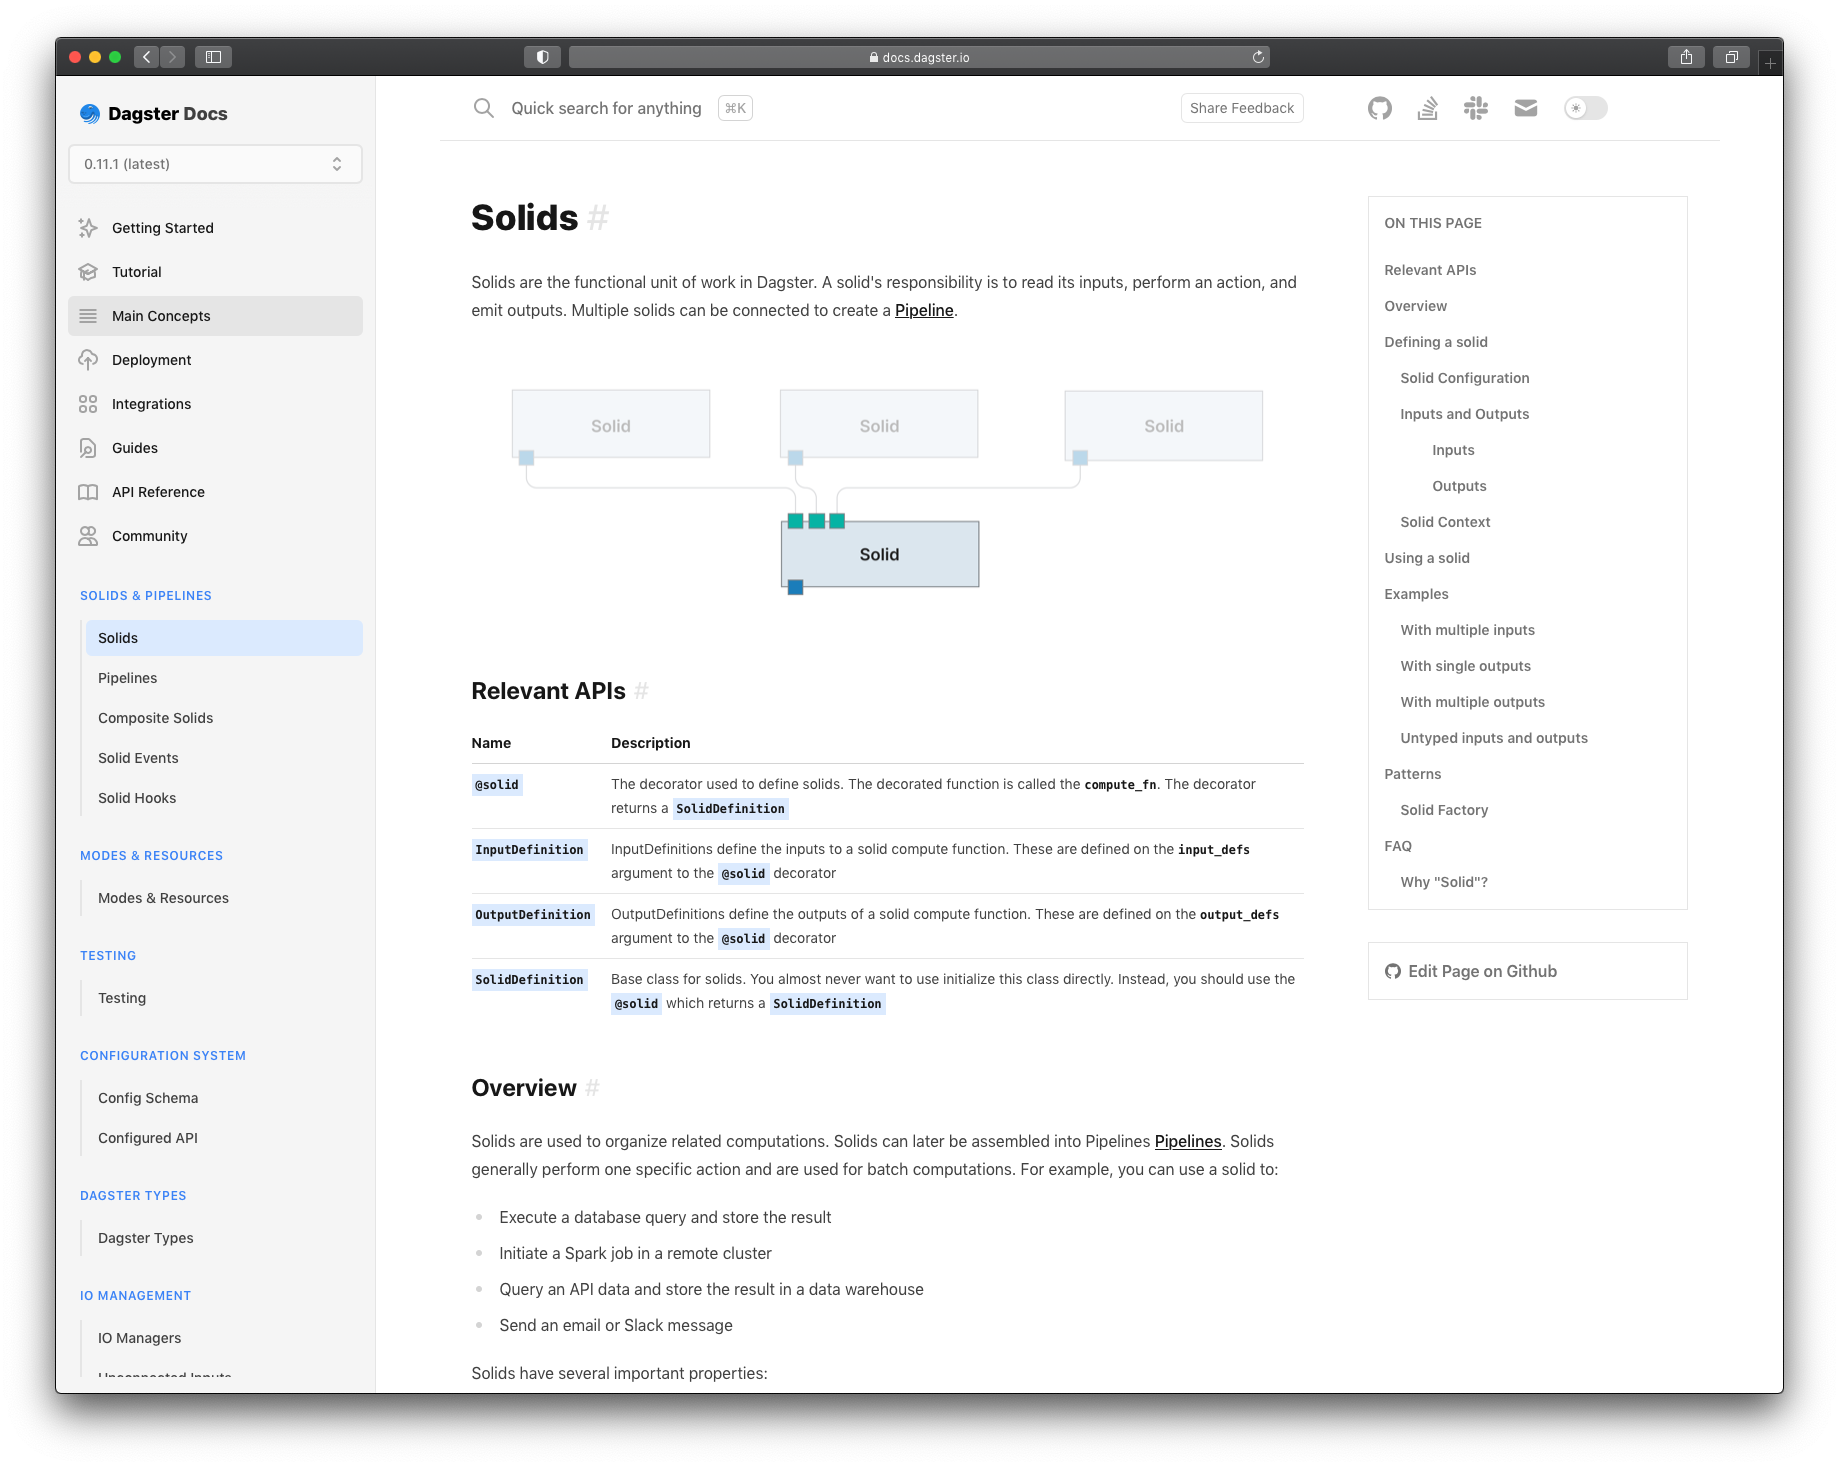 A new concepts page in the Dagster documentation